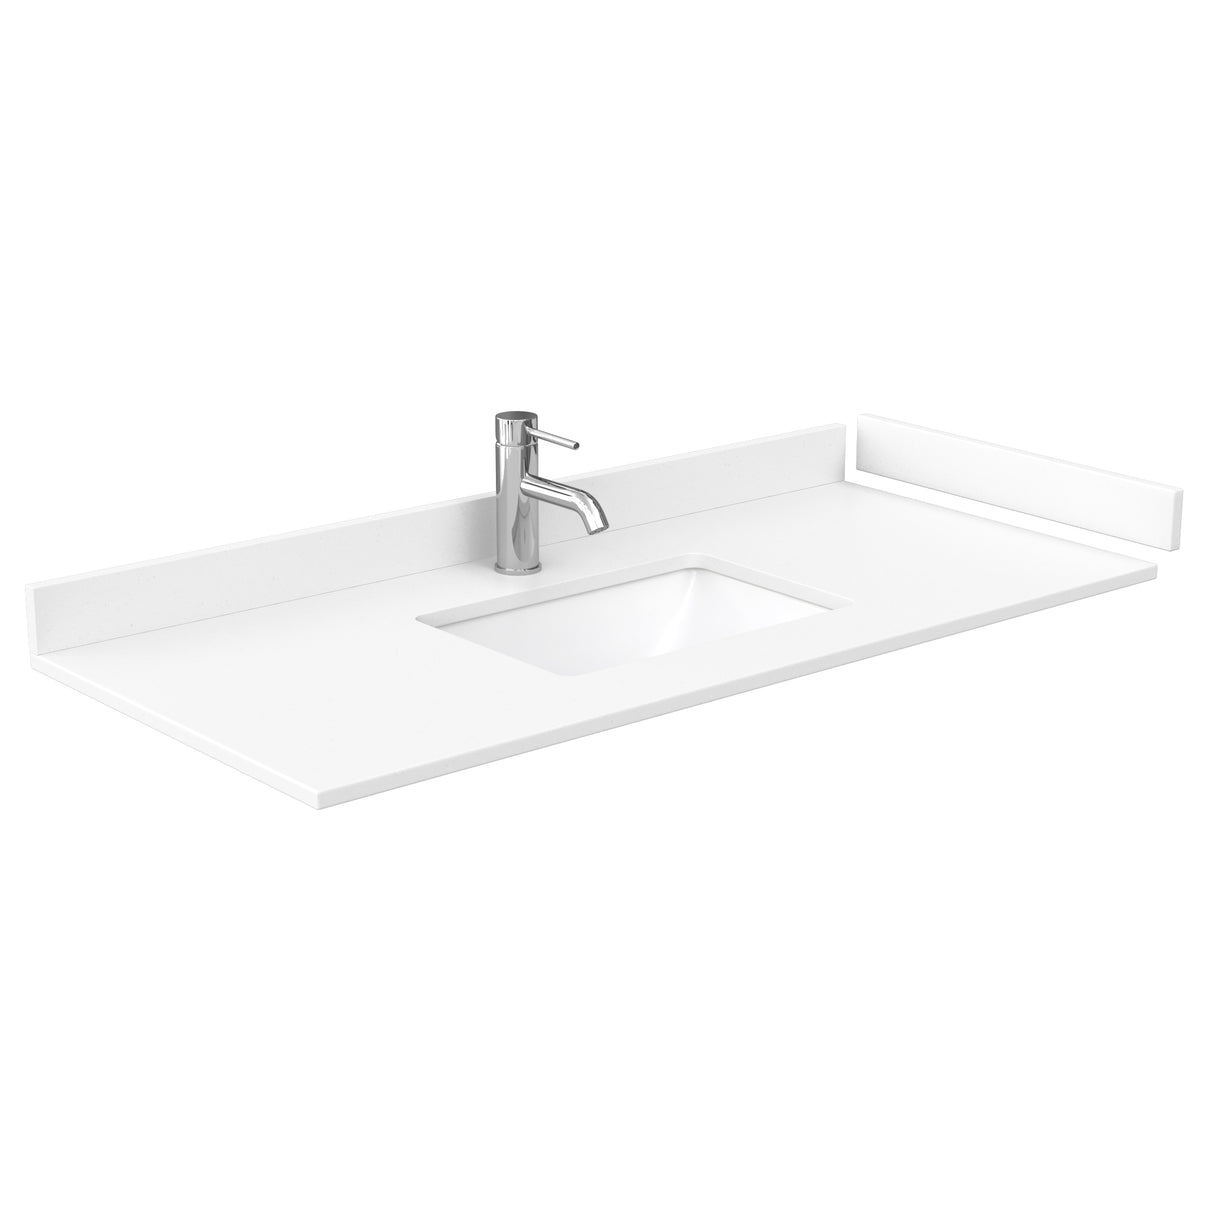 Avery 48 Inch Single Bathroom Vanity in White White Cultured Marble Countertop Undermount Square Sink Matte Black Trim